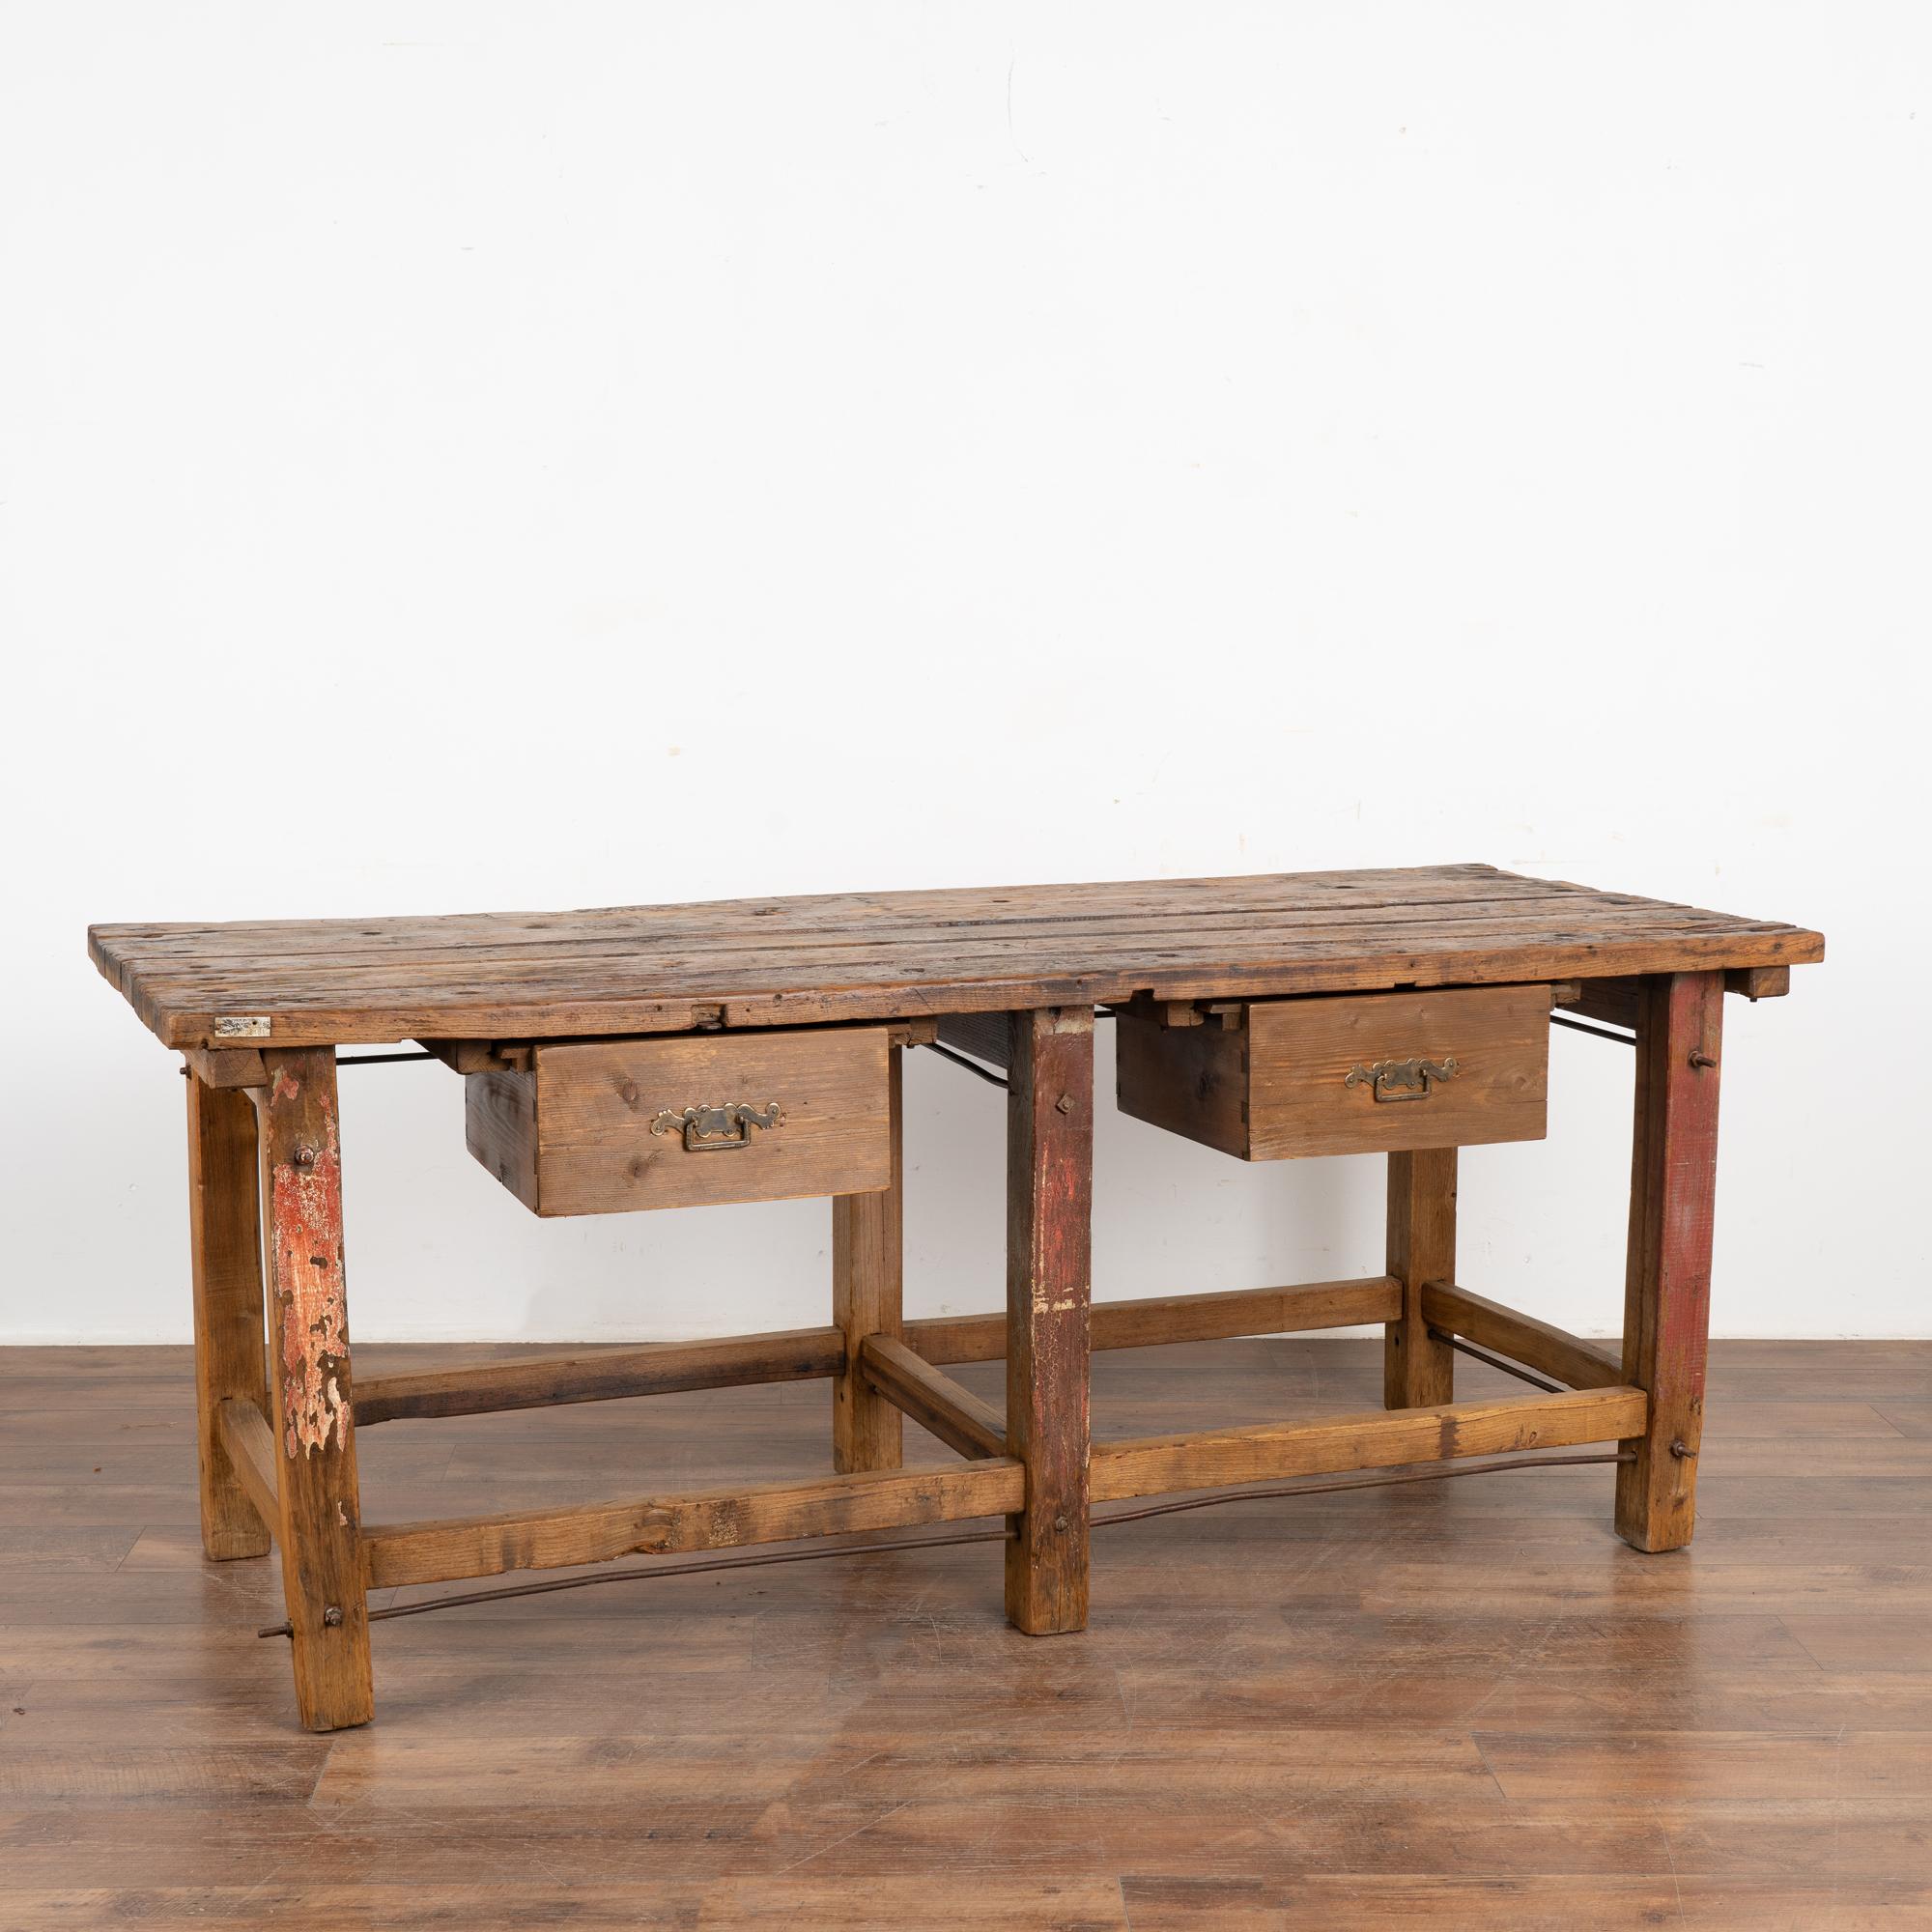 Rustic work table or shop counter with two drawers and residual red paint remaining on legs.
This heavily used table reflects generations of use in every gouge, nick, scratch, hole and stain. Typical aged separation of planks.
Metal rods add an